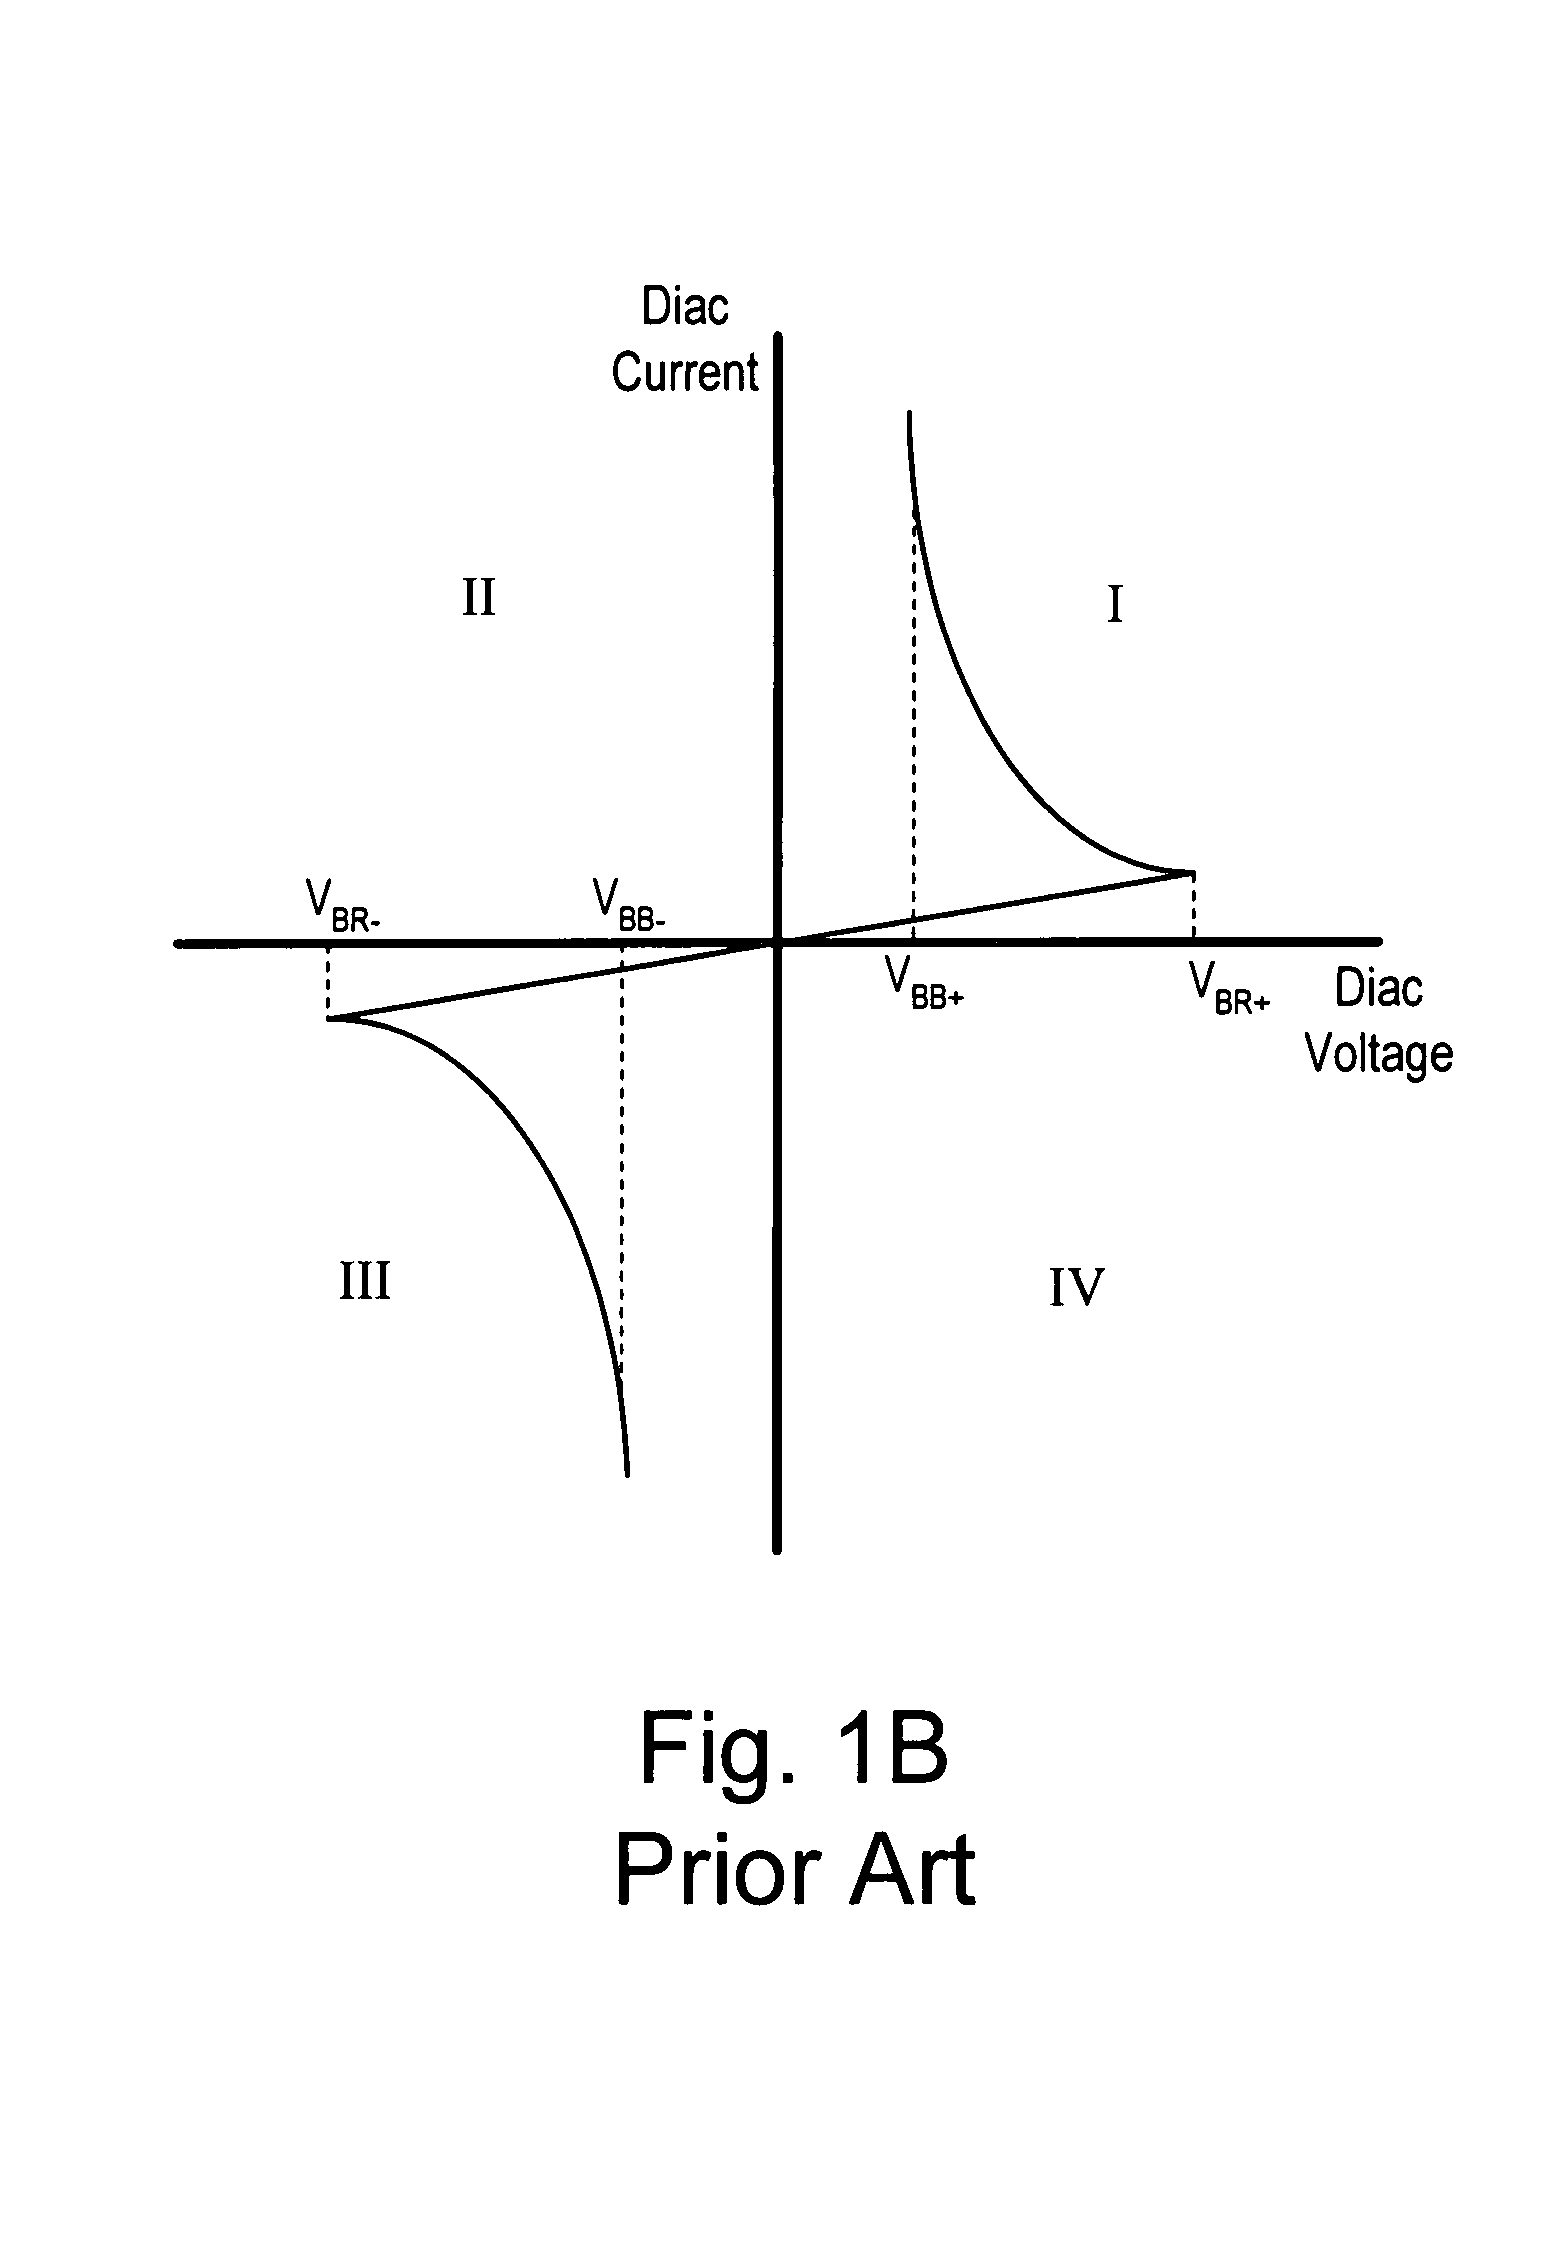 Method and apparatus for preventing multiple attempted firings of a semiconductor switch in a load control device